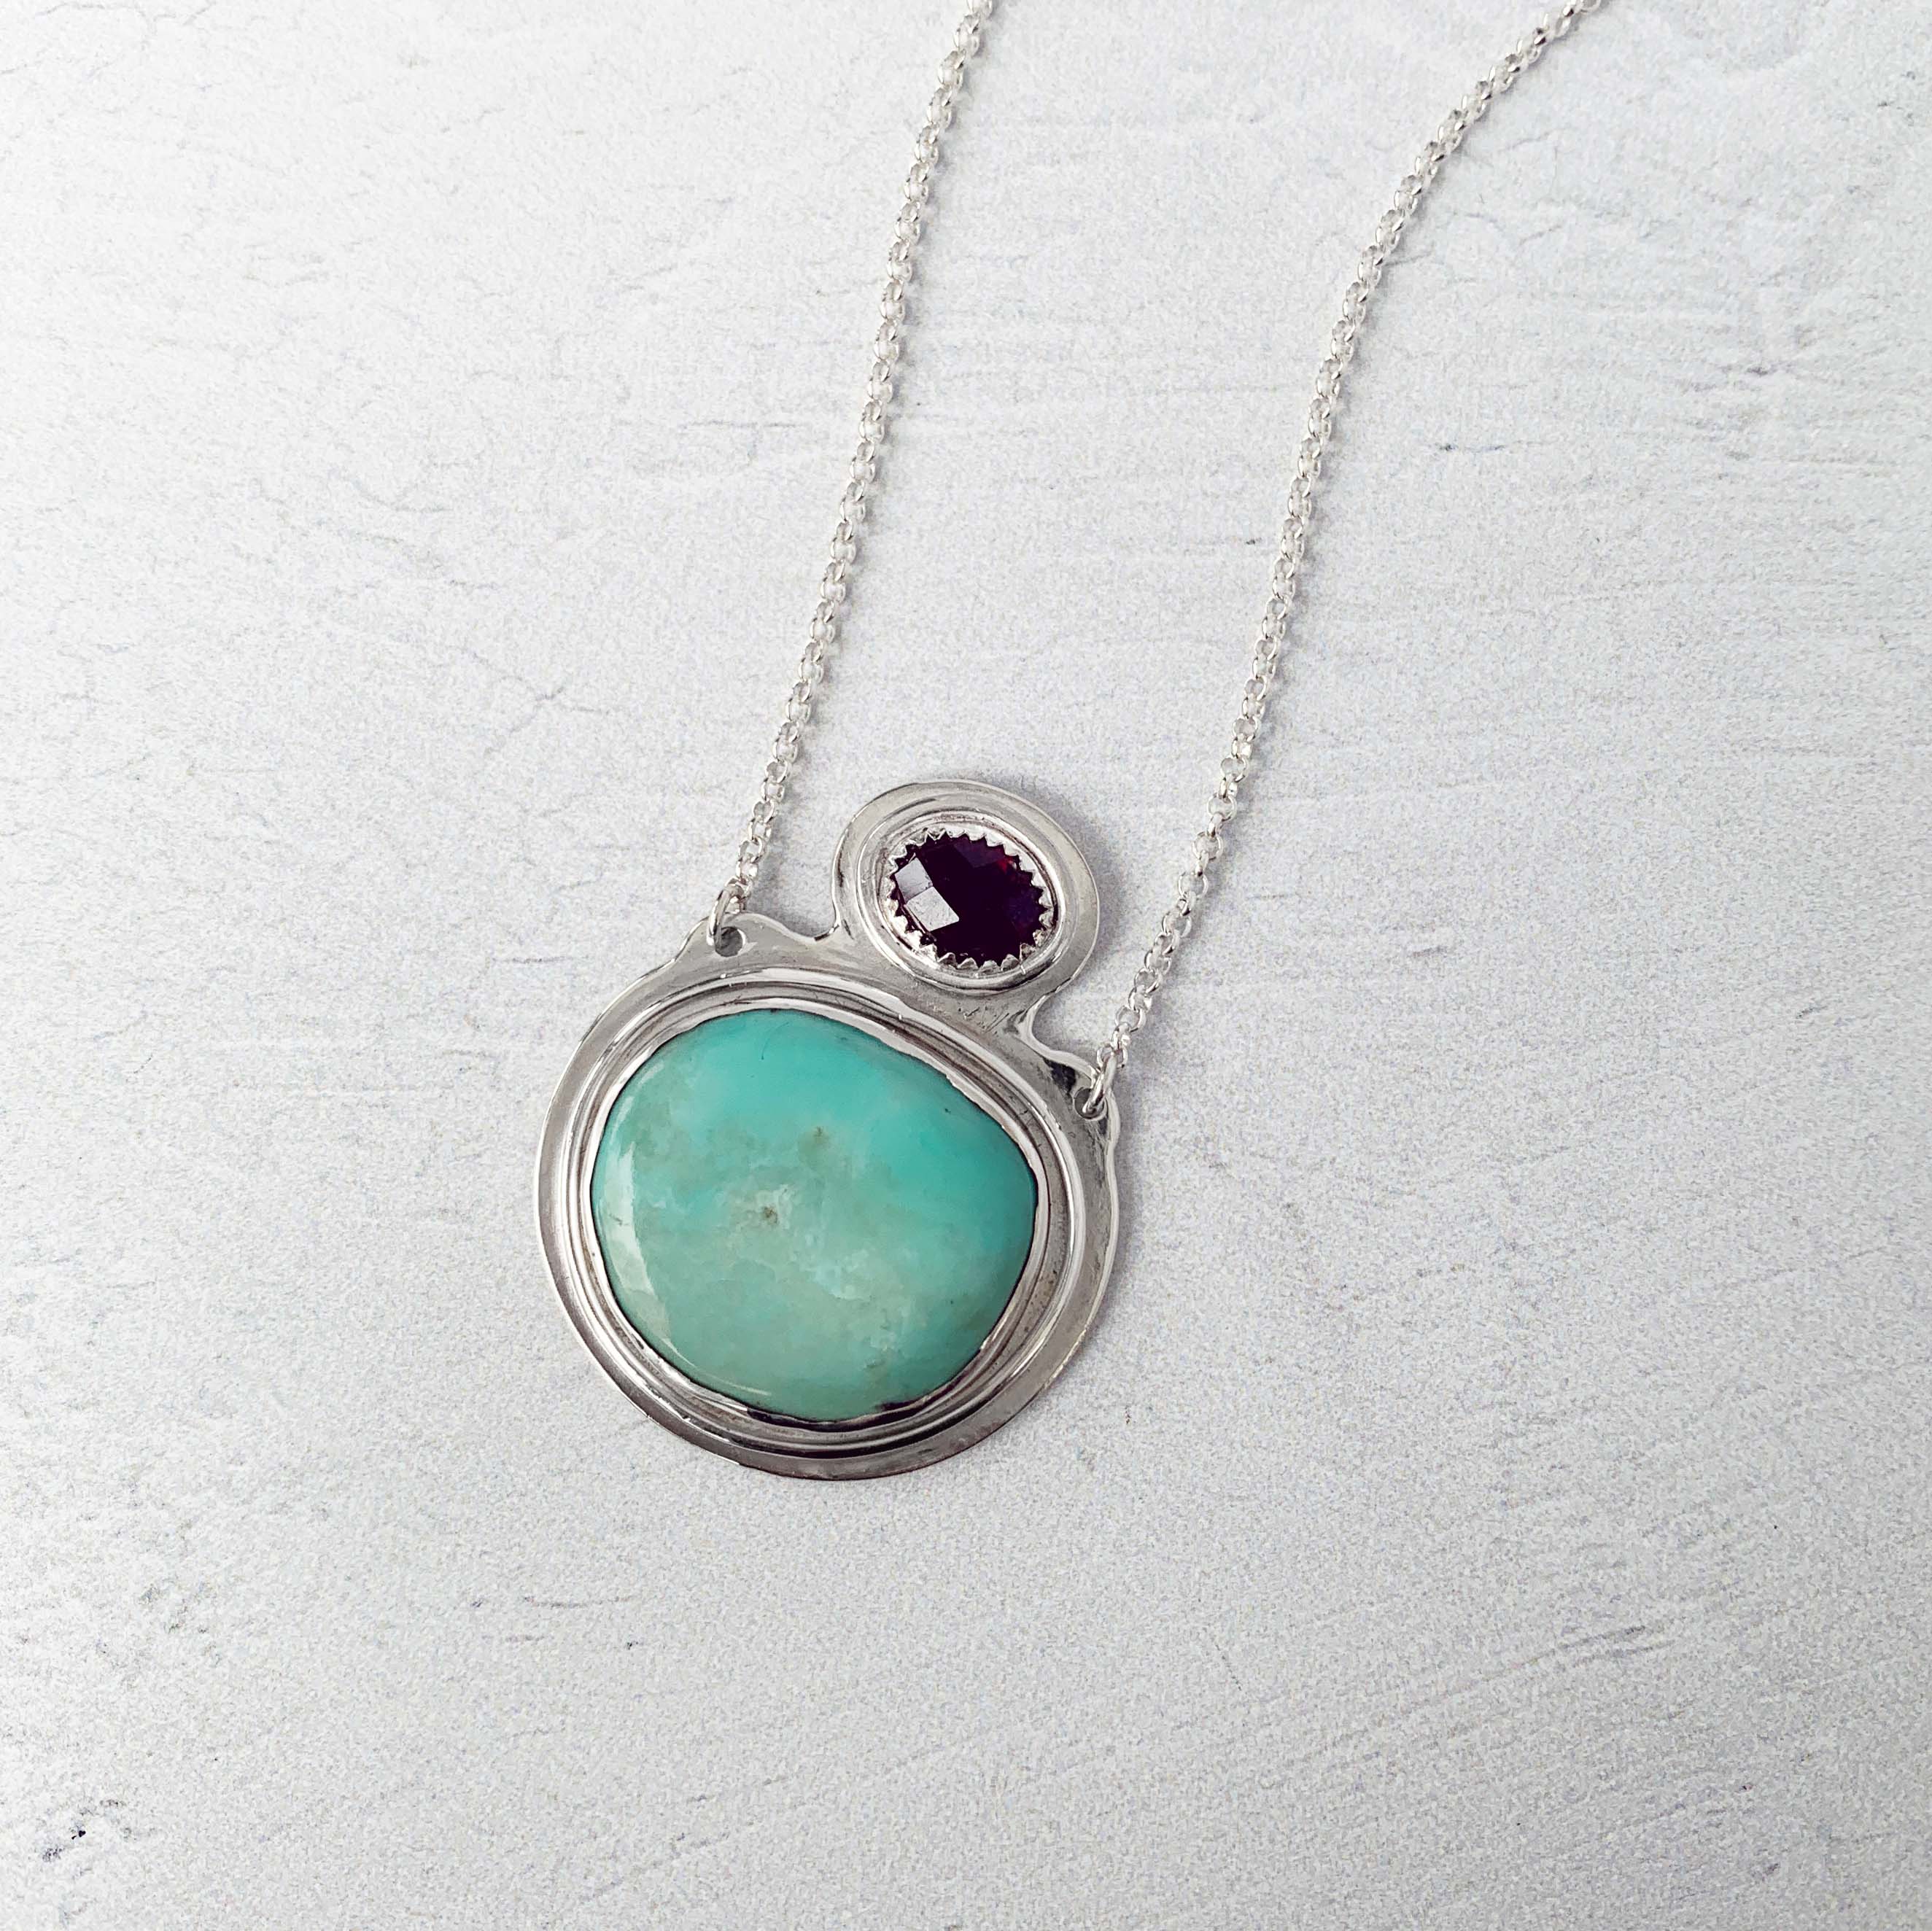 Campitos Turquoise & Faceted Garnet Sterling Silver Necklace